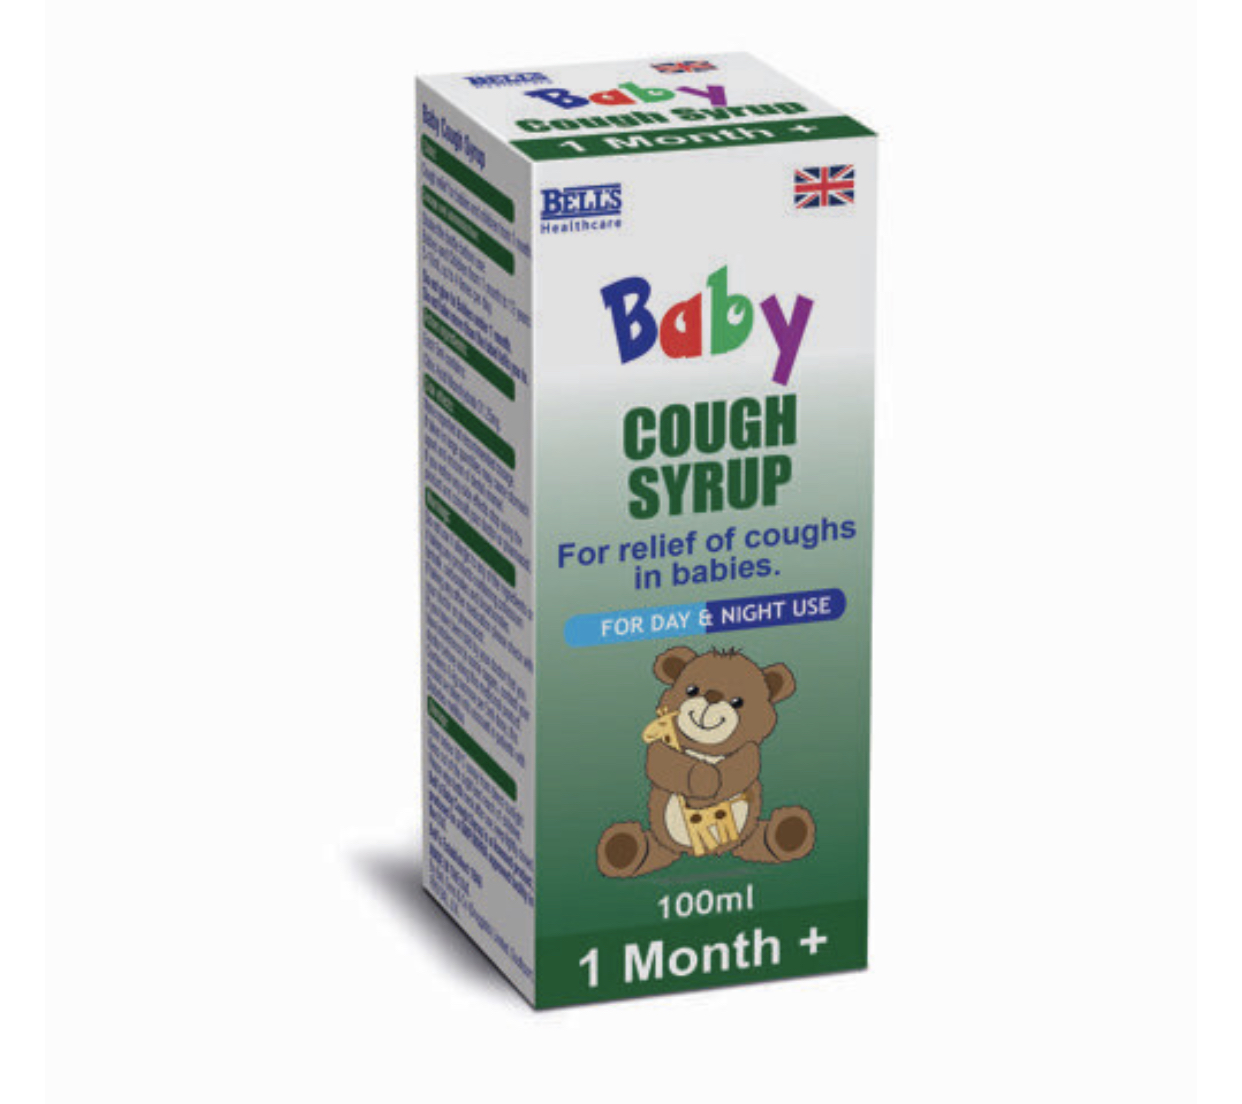 1682597487_httpswww.bells-healthcare.comstoreBaby-Cough-100ml-Improved-formulation-plus-updated-design-p169470029.png